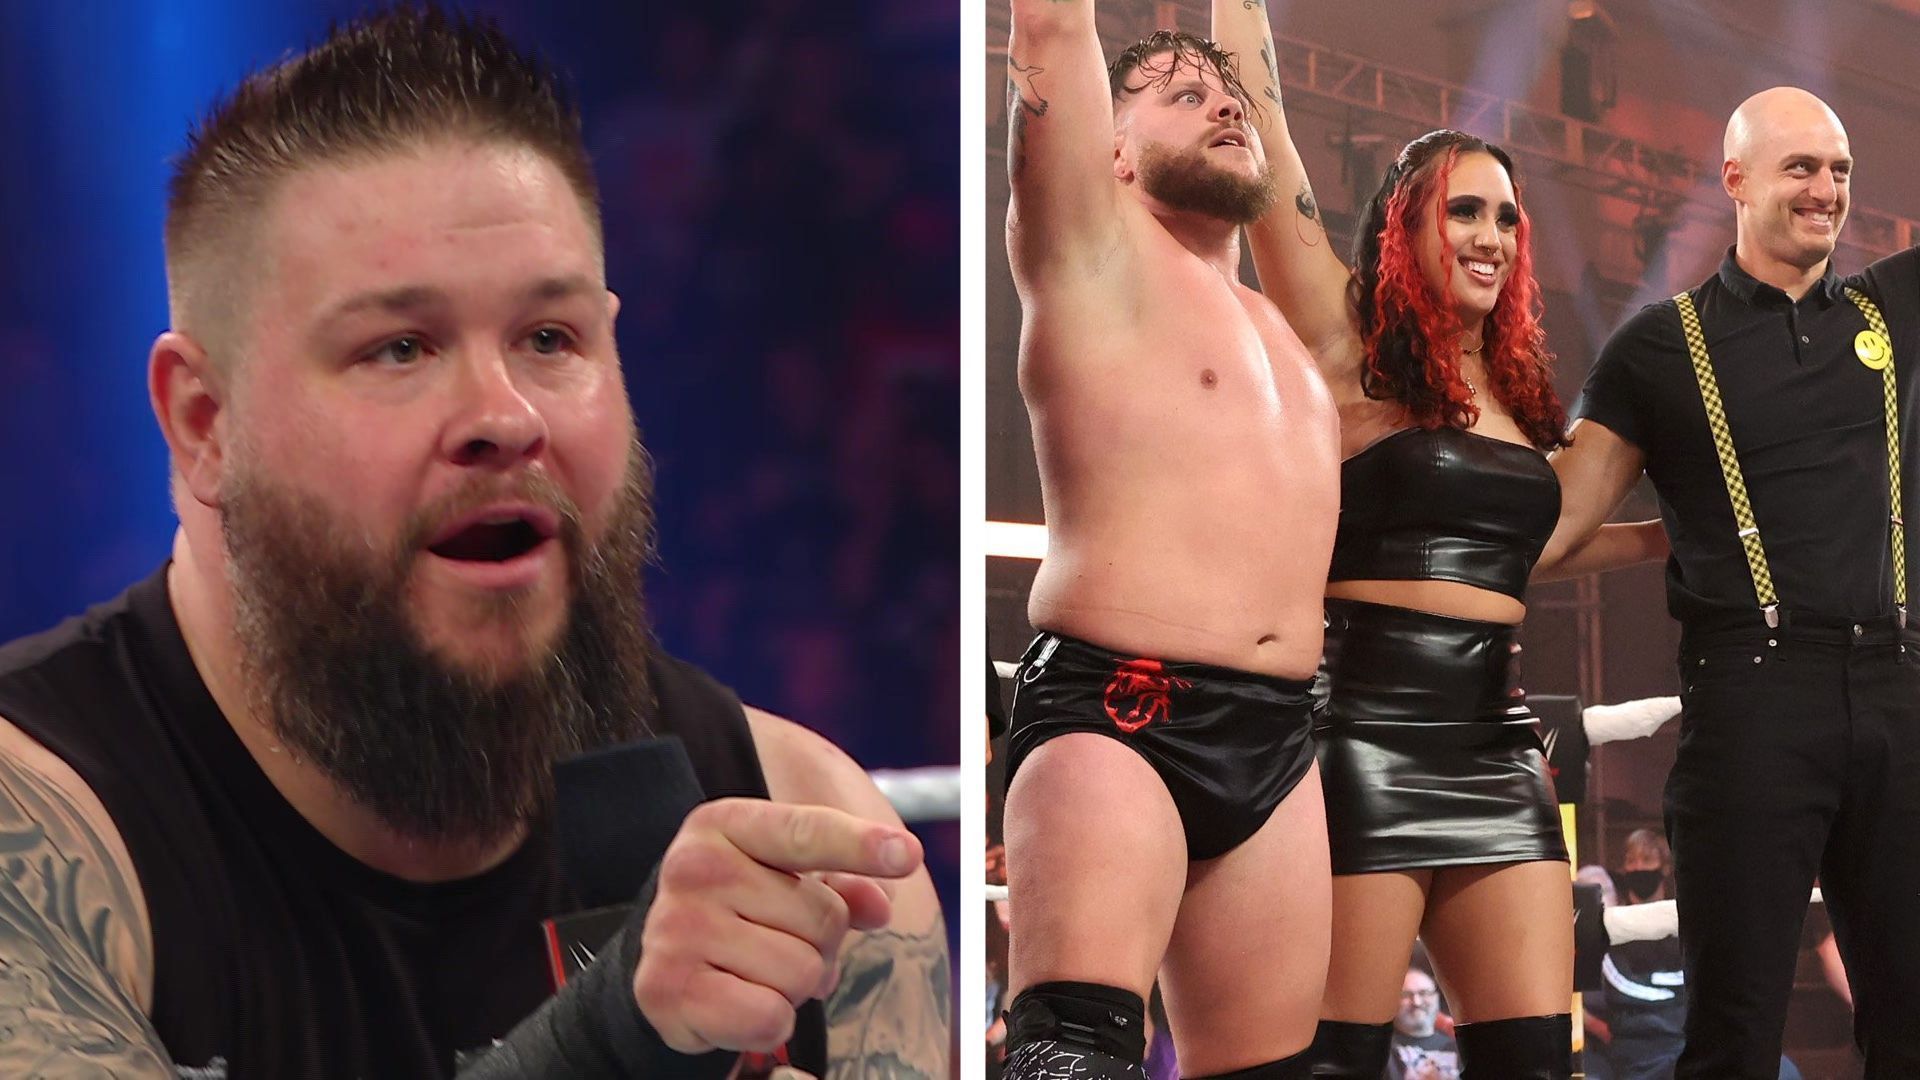 A handful of WWE stars could potentially join The Bloodline